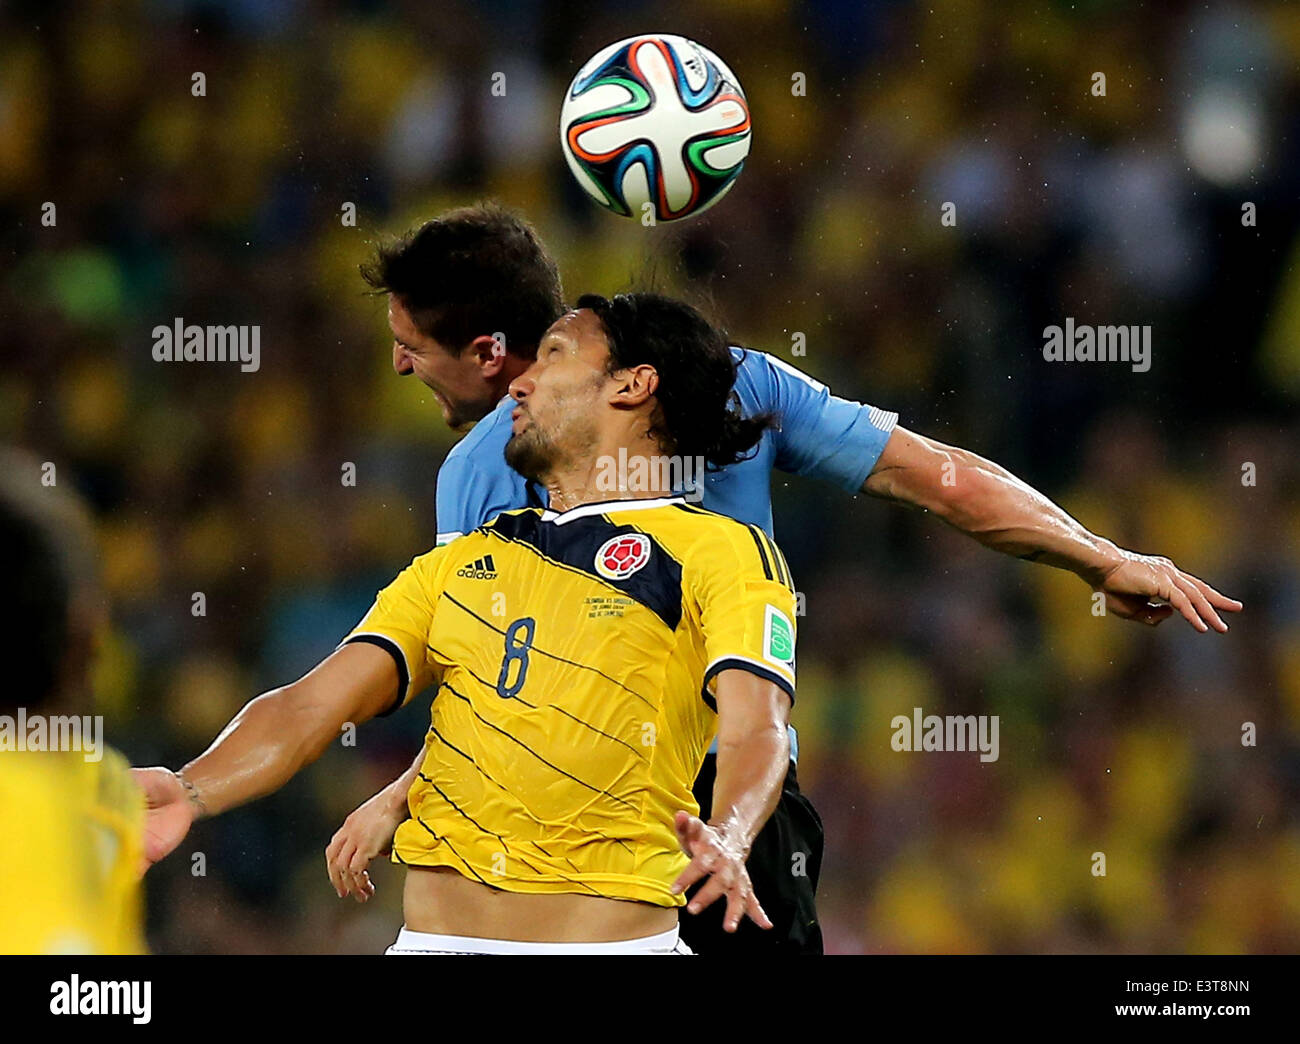 Rio De Janeiro, Brazil. 28th June, 2014. Colombia's Abel Aguilar jumps for a header during a Round of 16 match between Colombia and Uruguay of 2014 FIFA World Cup at the Estadio do Maracana Stadium in Rio de Janeiro, Brazil, on June 28, 2014. Credit:  Xu Zijian/Xinhua/Alamy Live News Stock Photo